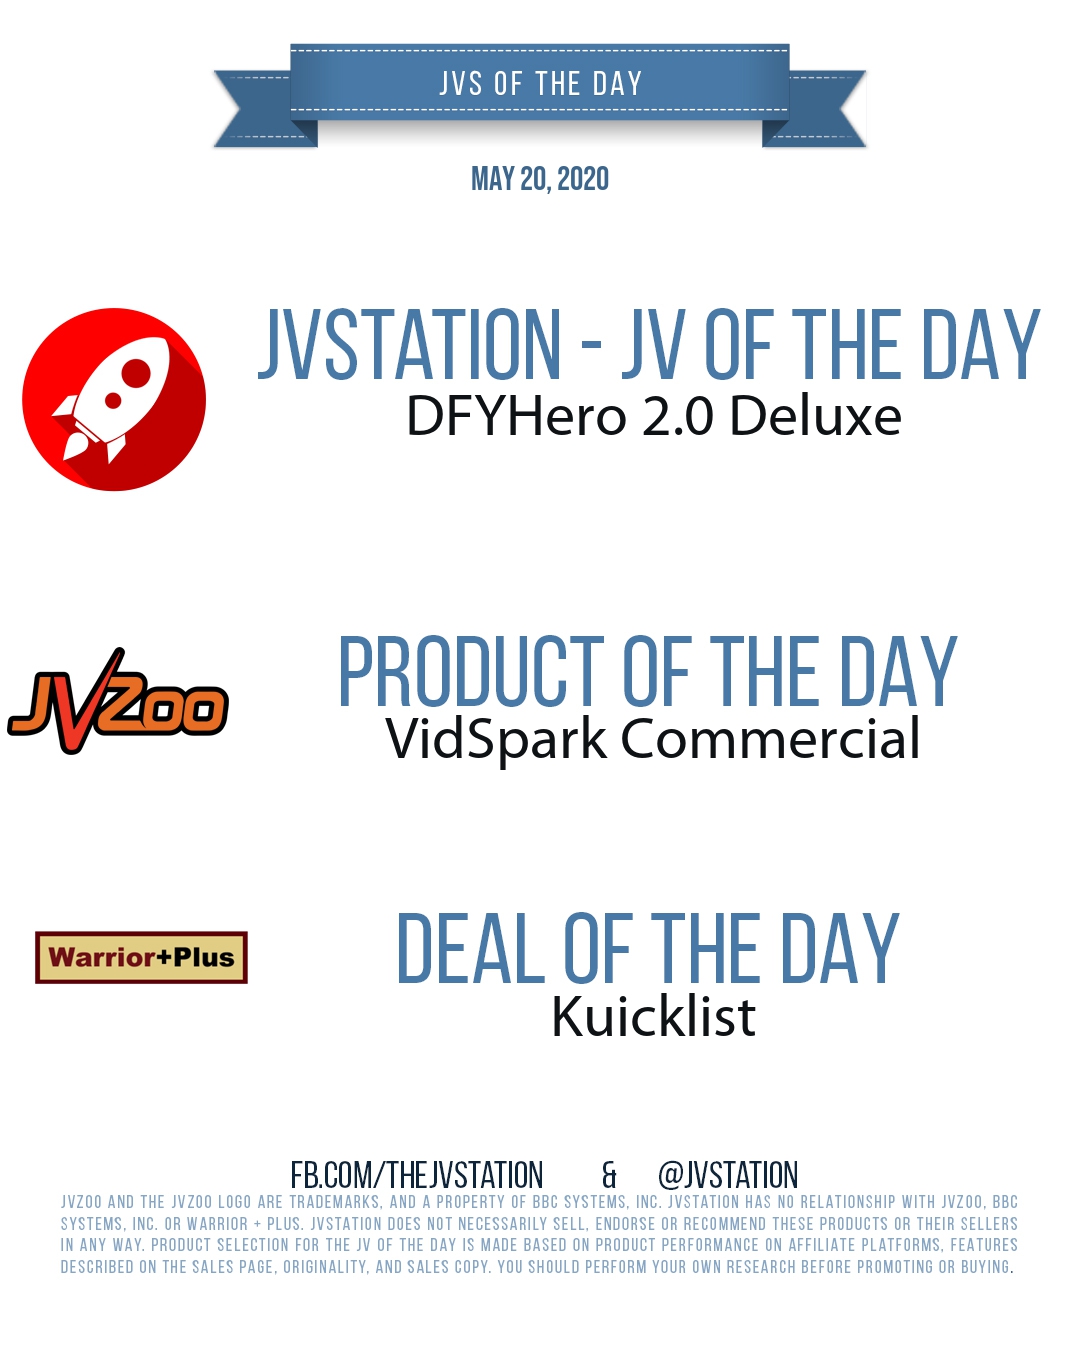 JVs of the day - May 20, 2020